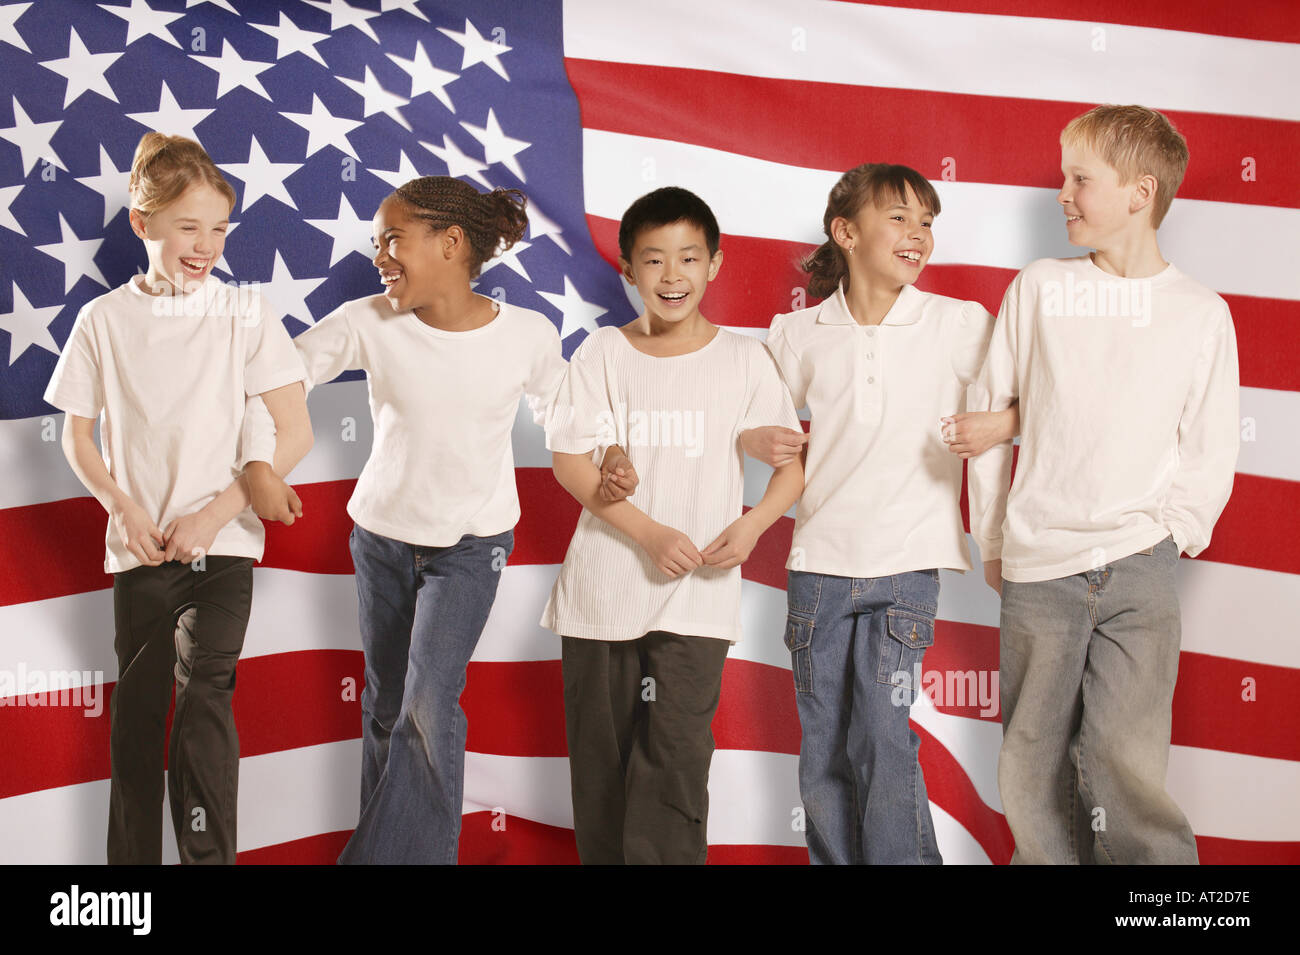 Children in front of American flag Stock Photo